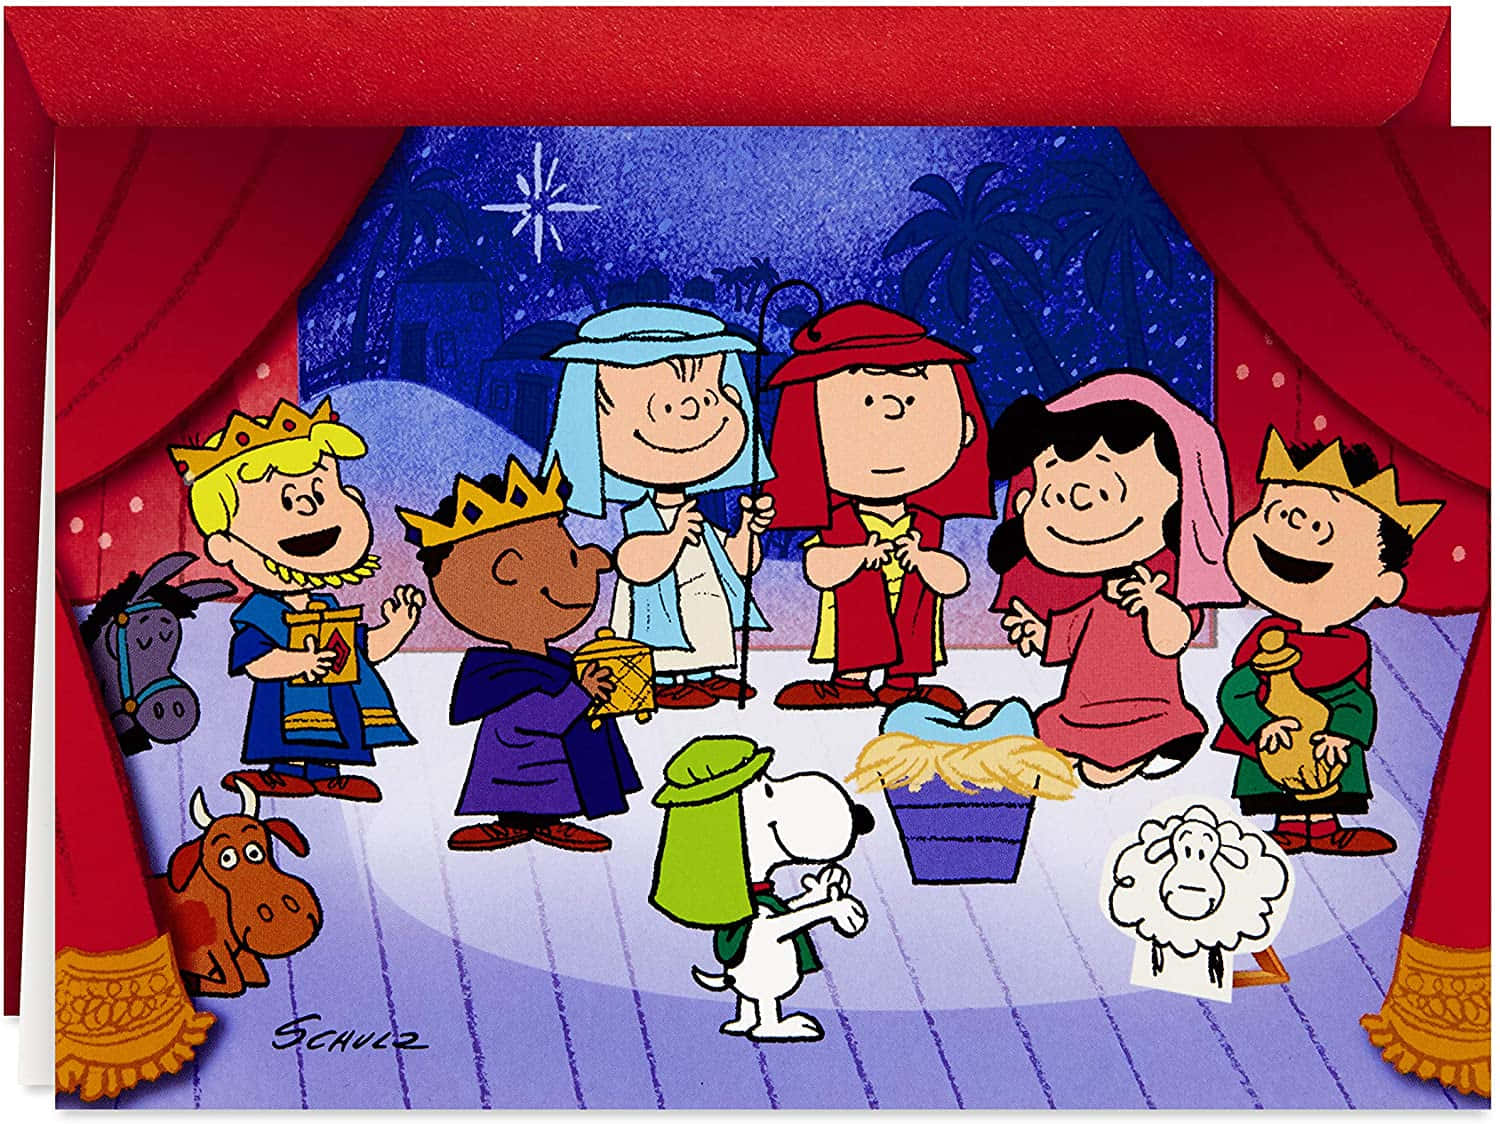 Celebrate Christmas With Snoopy And The Peanuts Gang! Wallpaper